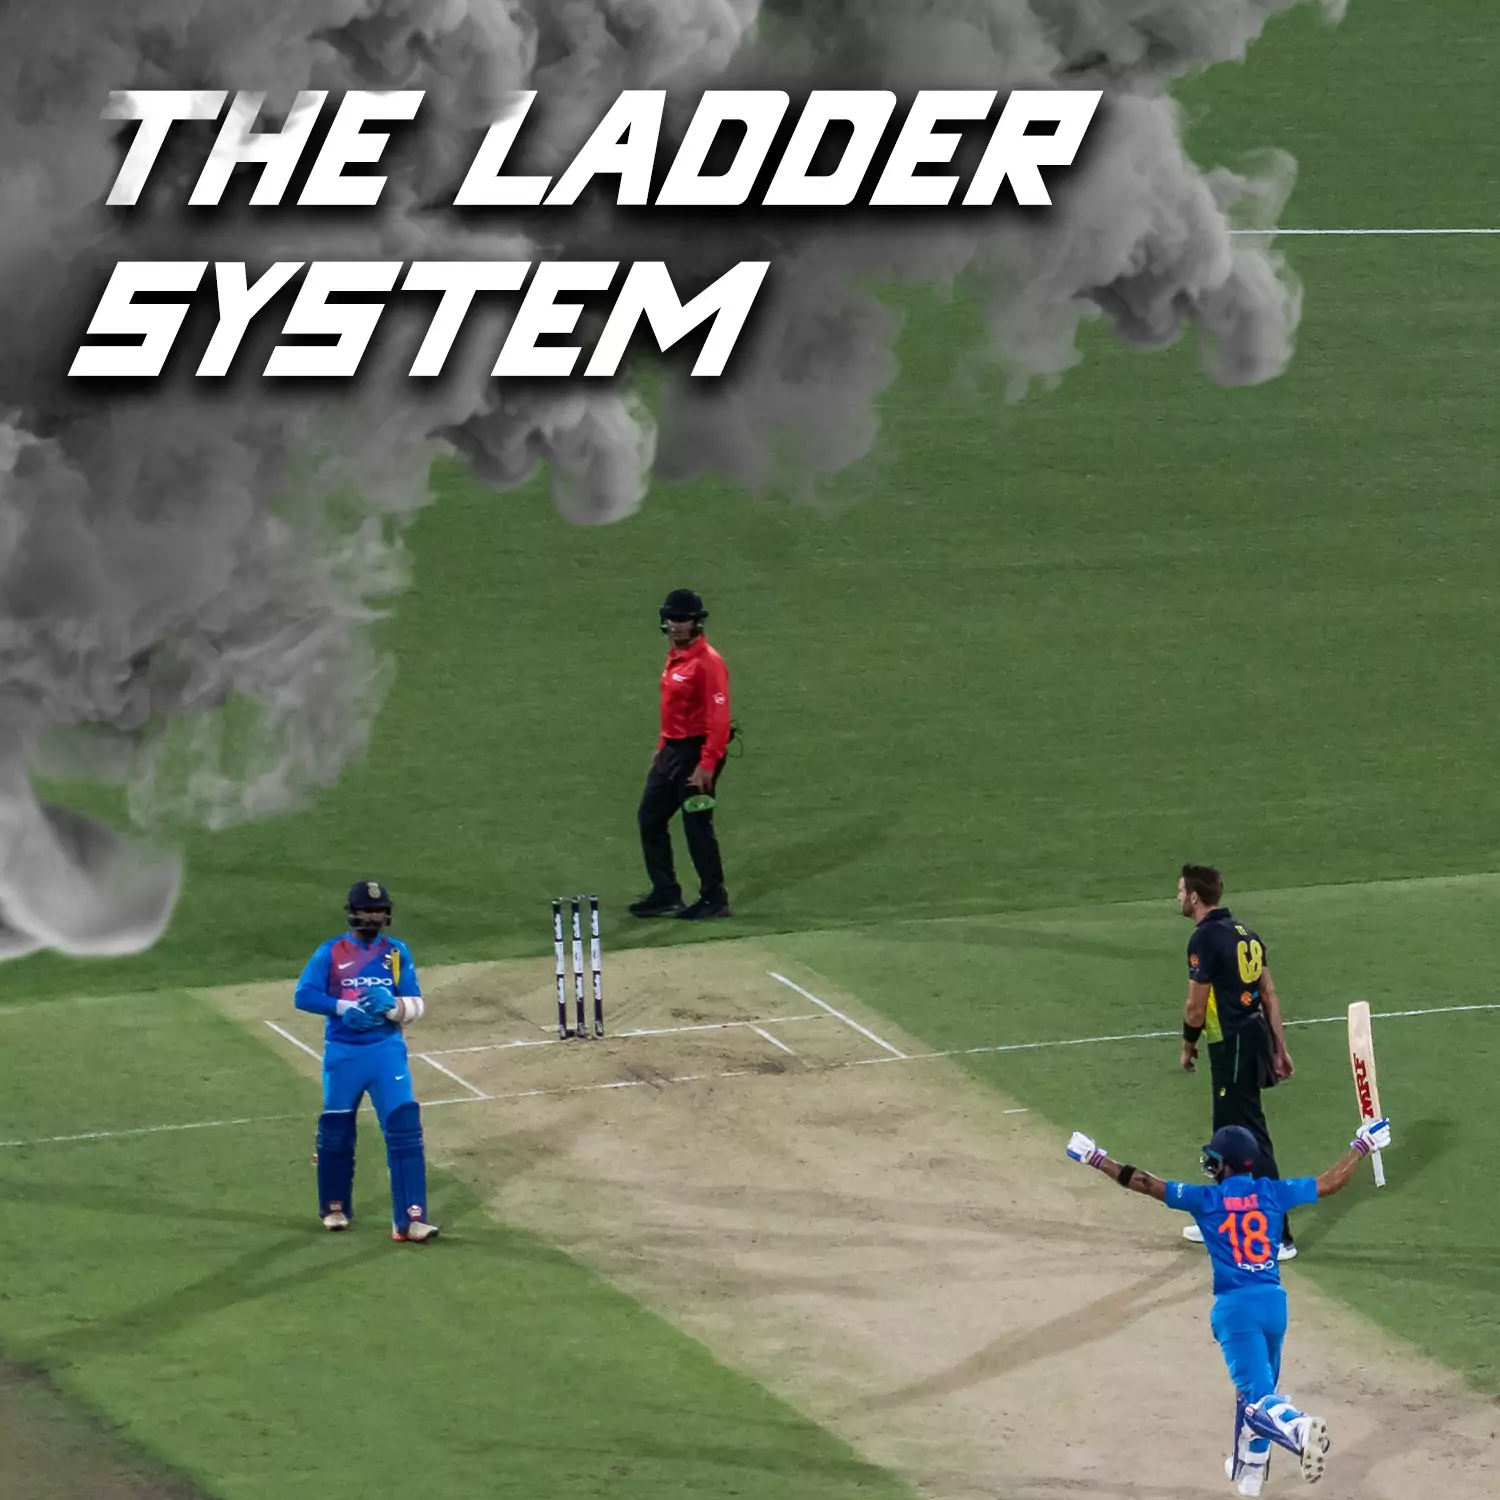 Ladder System is designed to win you real money after every successful bet.